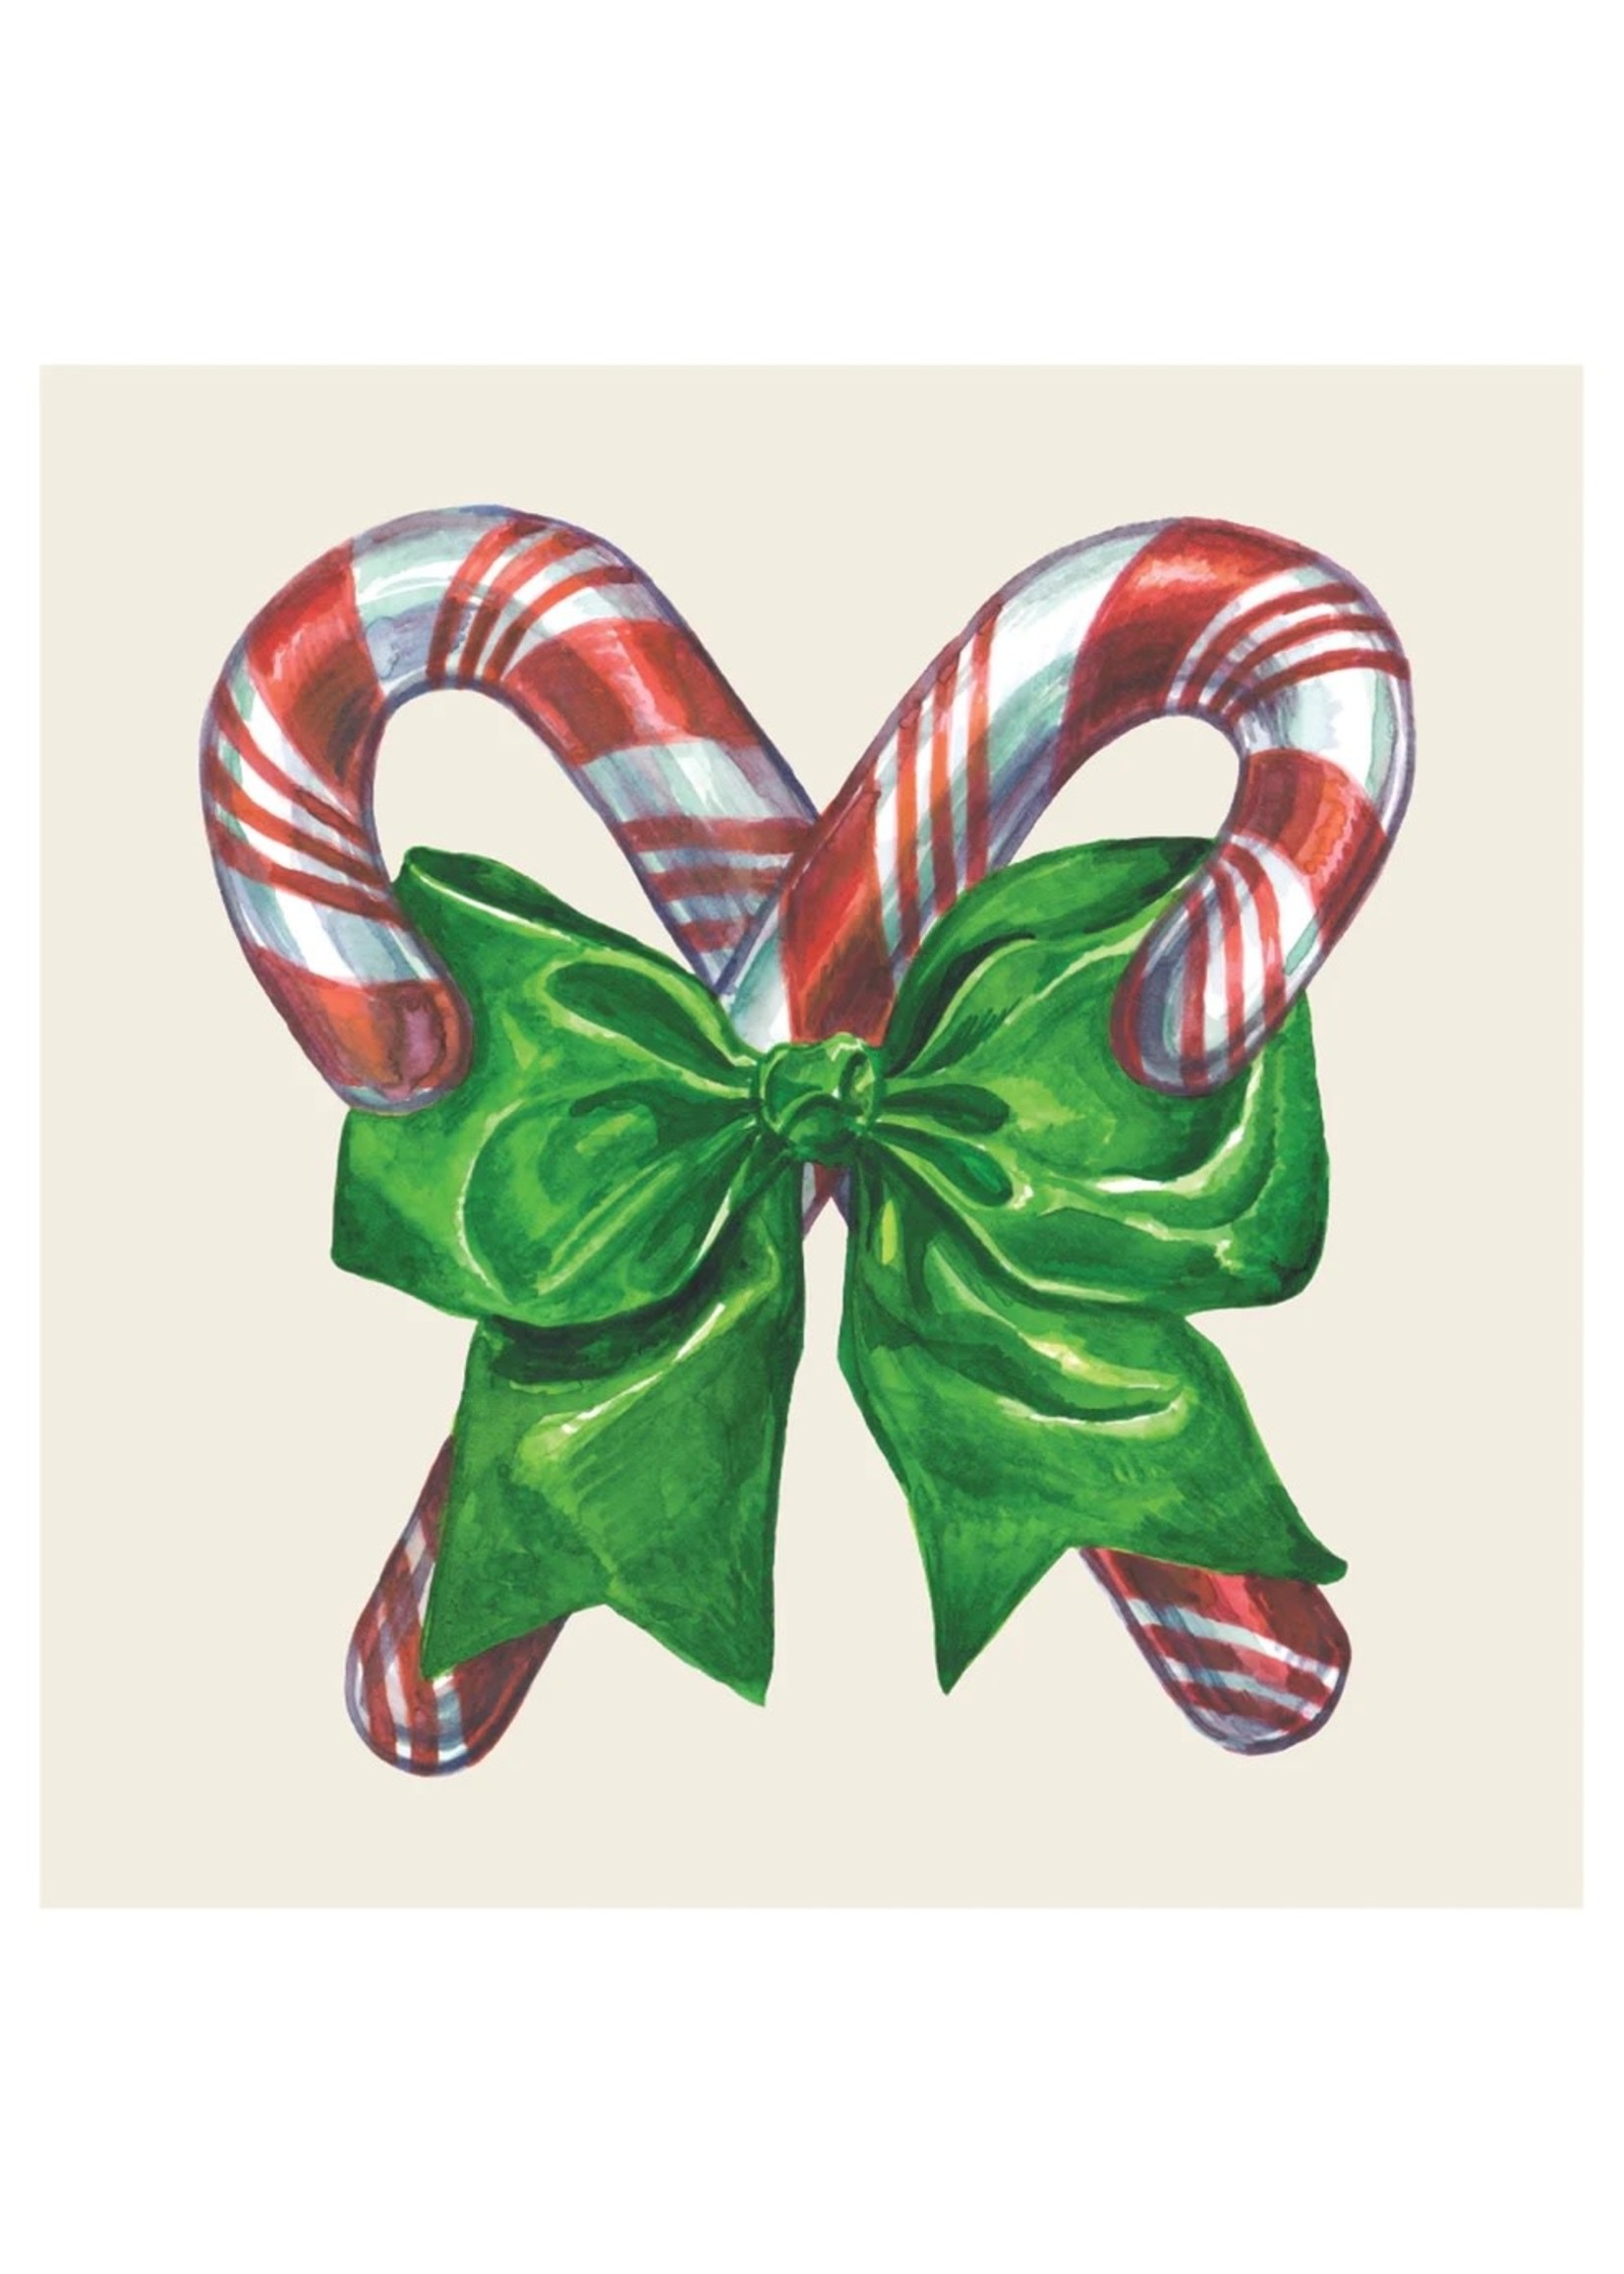 Hester & Cook Paper Cocktail Napkin - Candy Cane